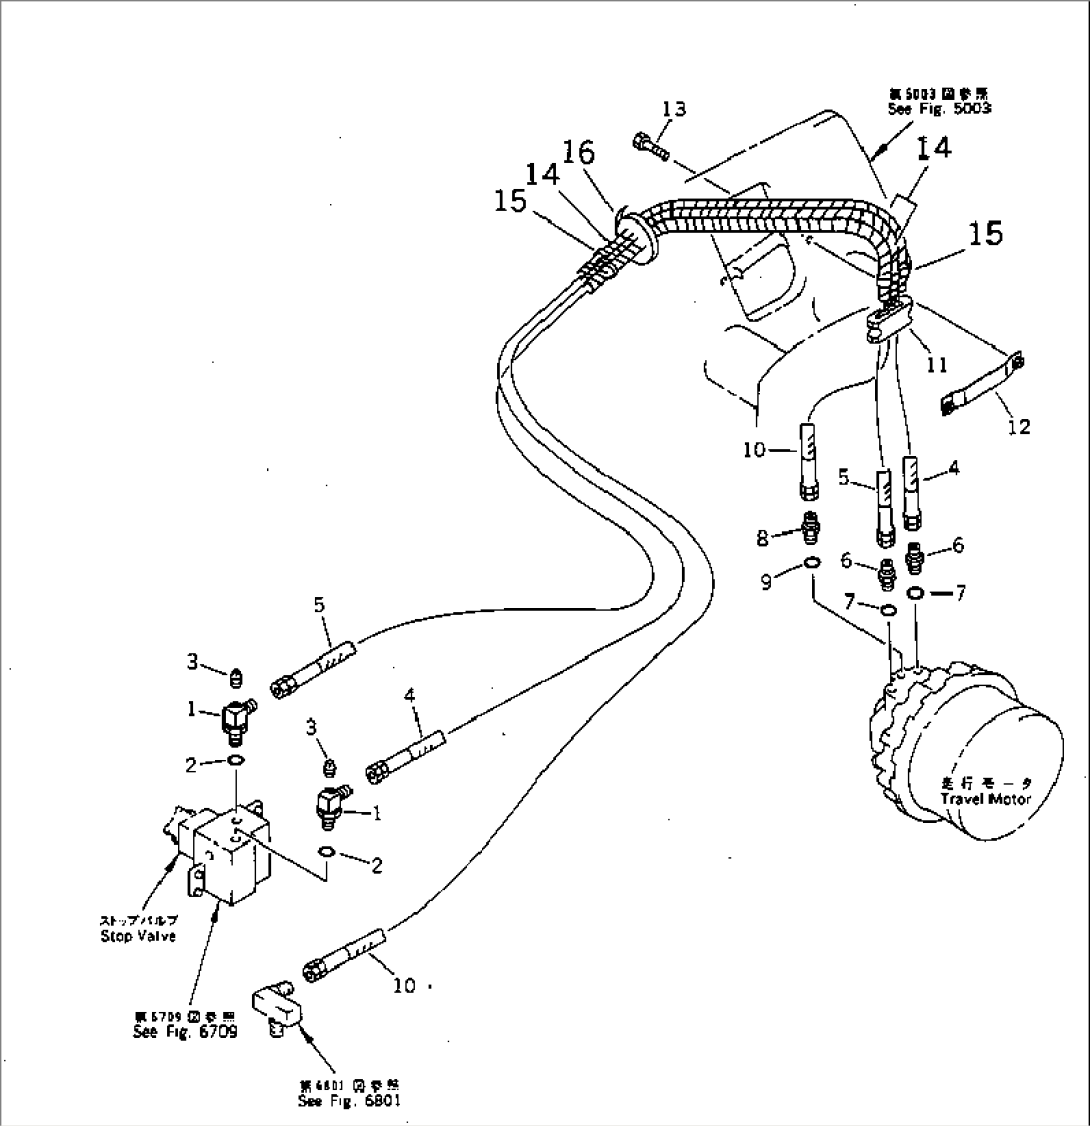 HYDRAULIC PIPING (STOP VALVE TO TRAVEL MOTOR) (REAR)